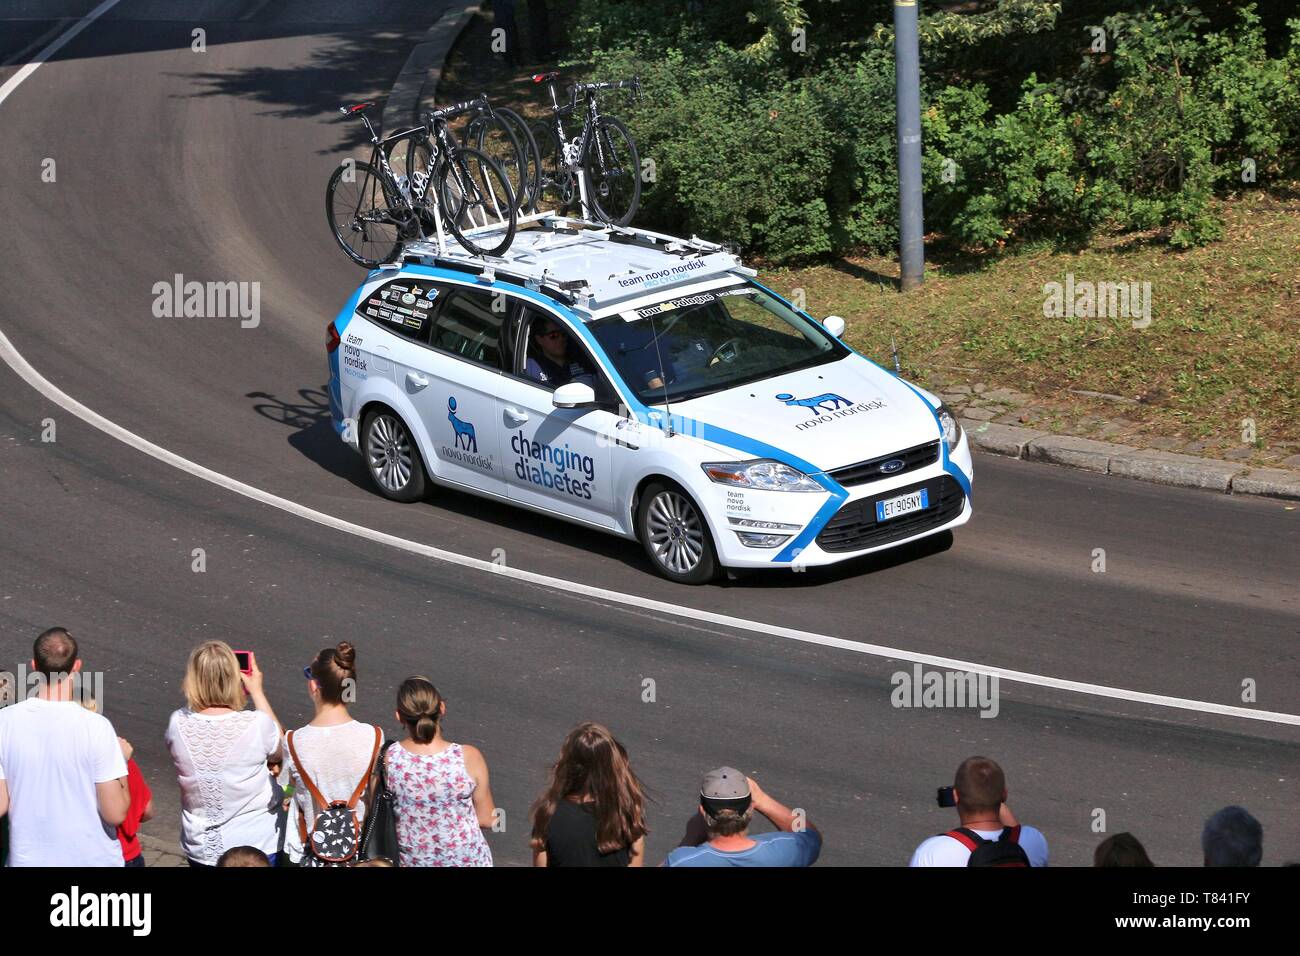 BYTOM, POLAND - JULY 13, 2016: Team vehicle drives in Tour de Pologne bicycle race in Poland. Ford Mondeo of Novo Nordisk pro cycling team. Stock Photo